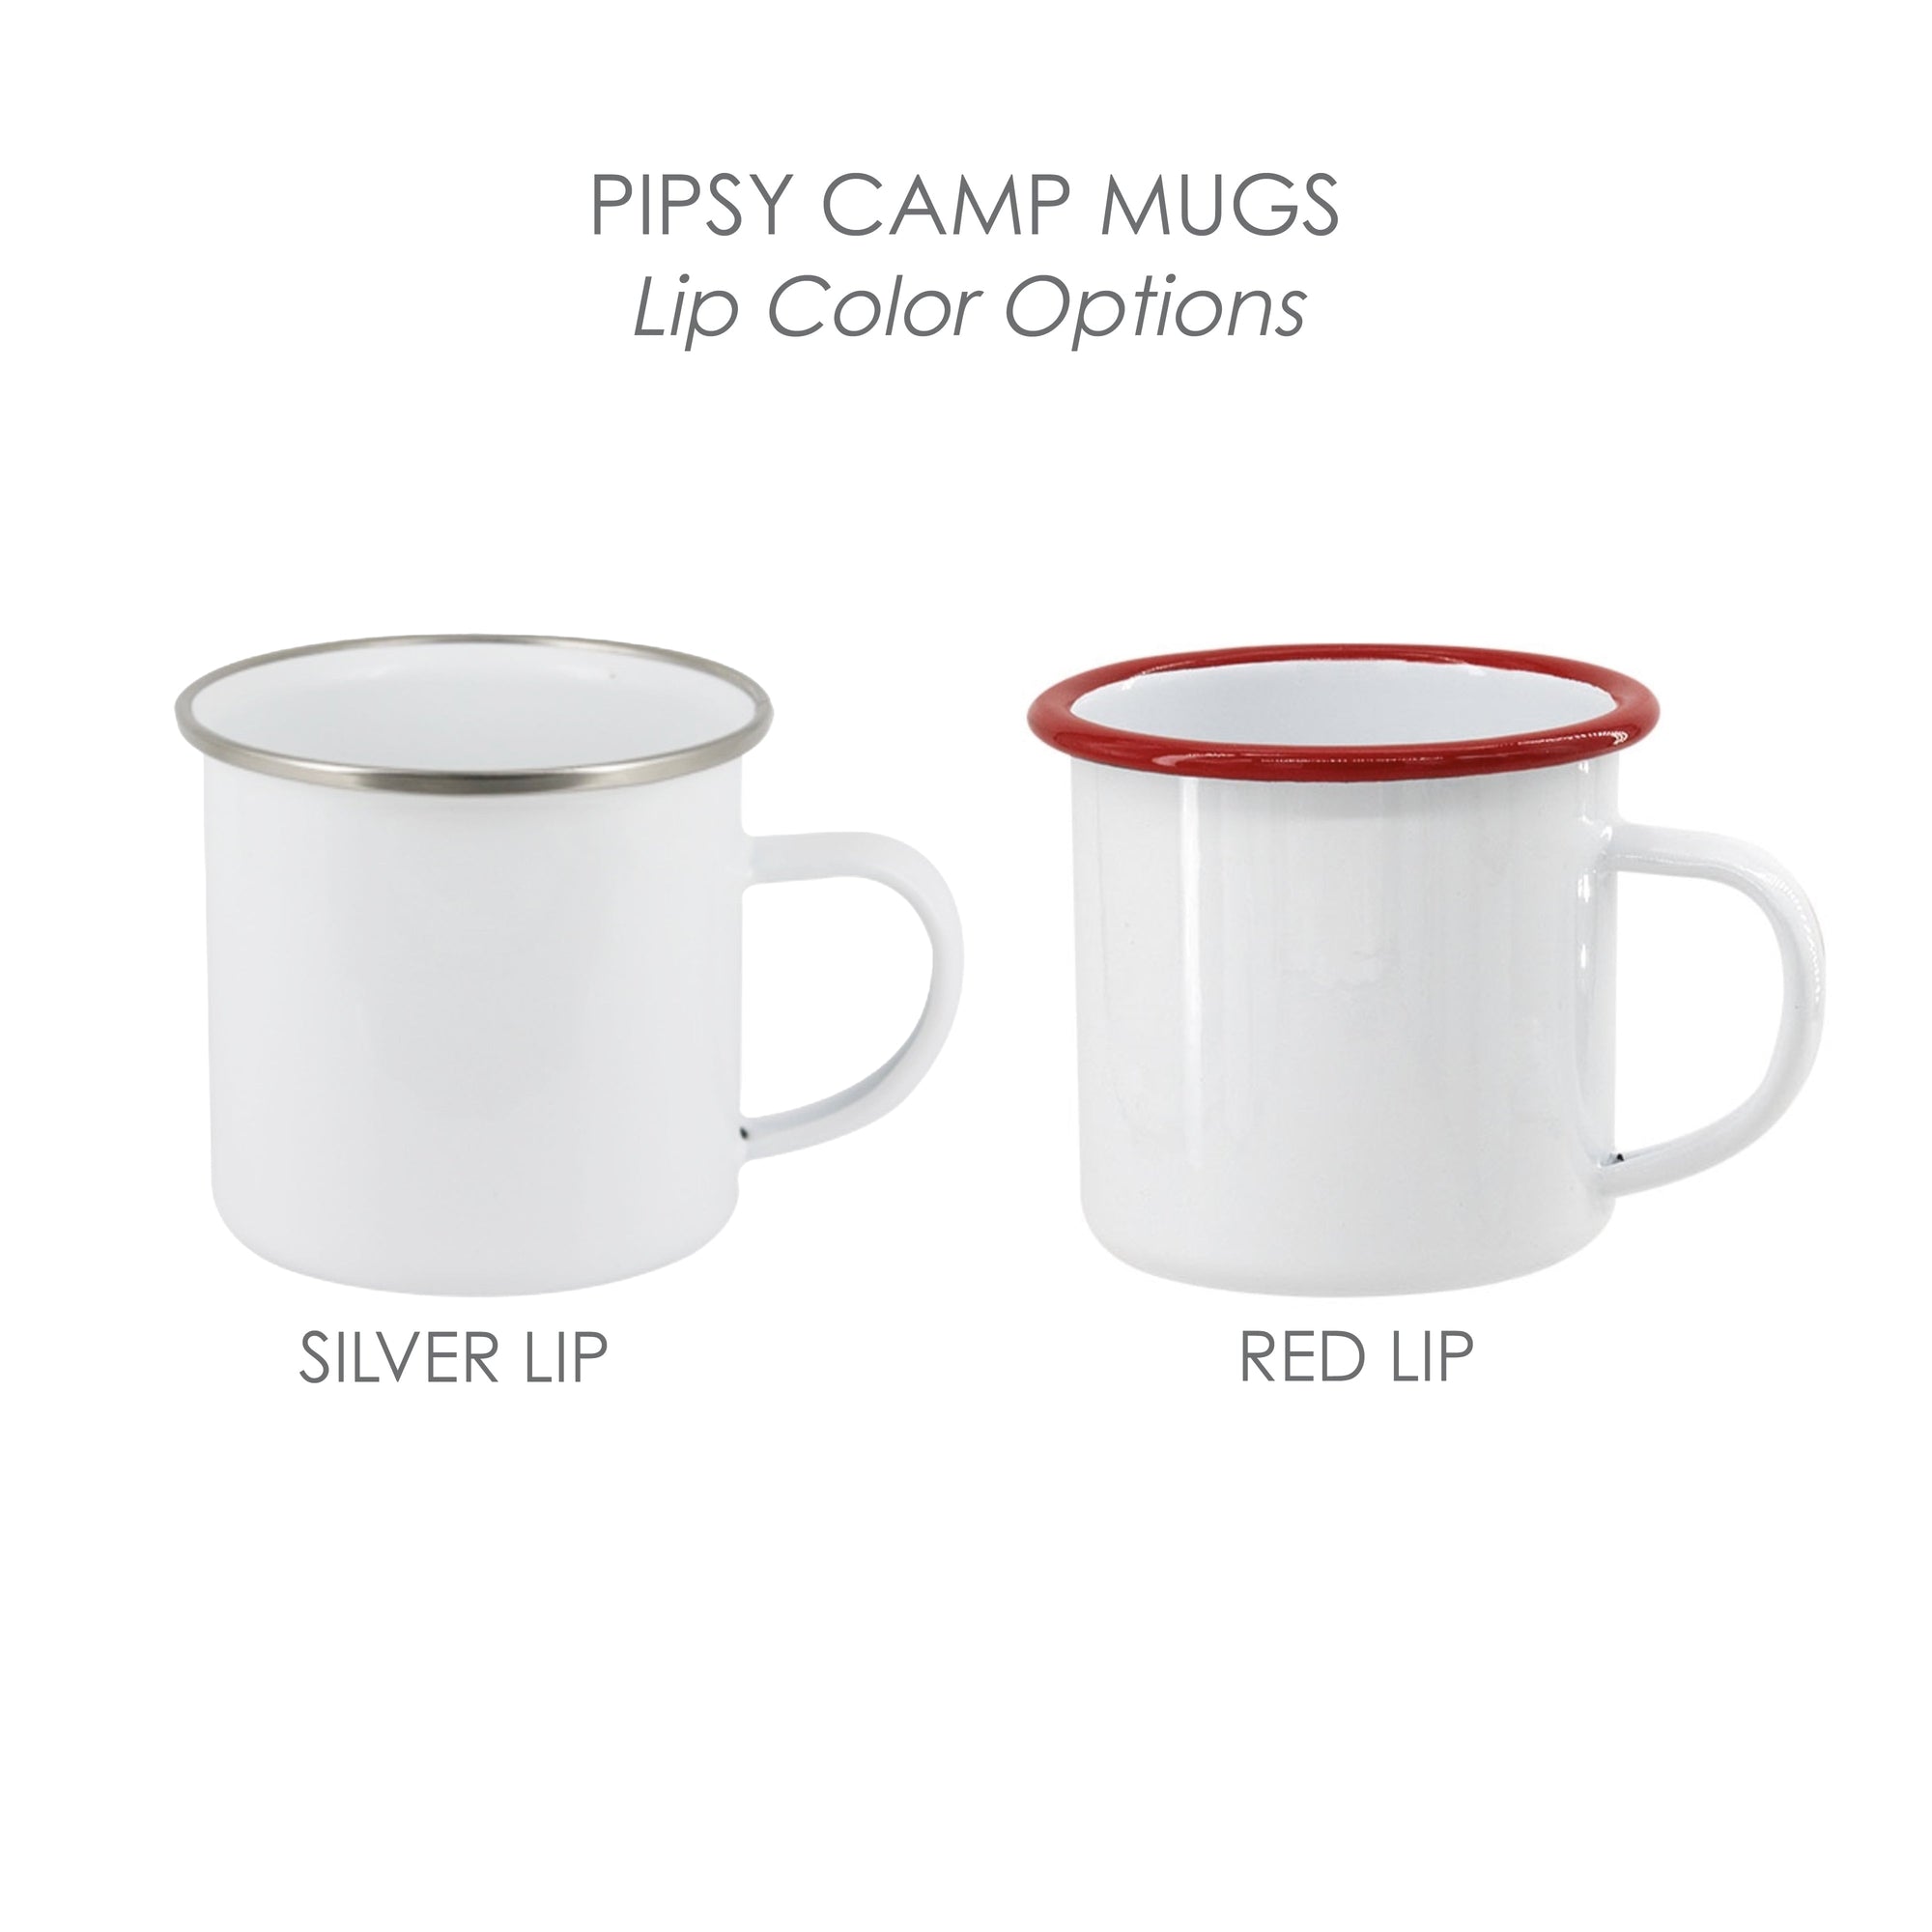 Metal Camp Mug, red or silver lip.  Design on both sides of mug. Permanent prints (not decals) - will not fade or peel.  Does not break, dishwasher safe.  Pipsy.com